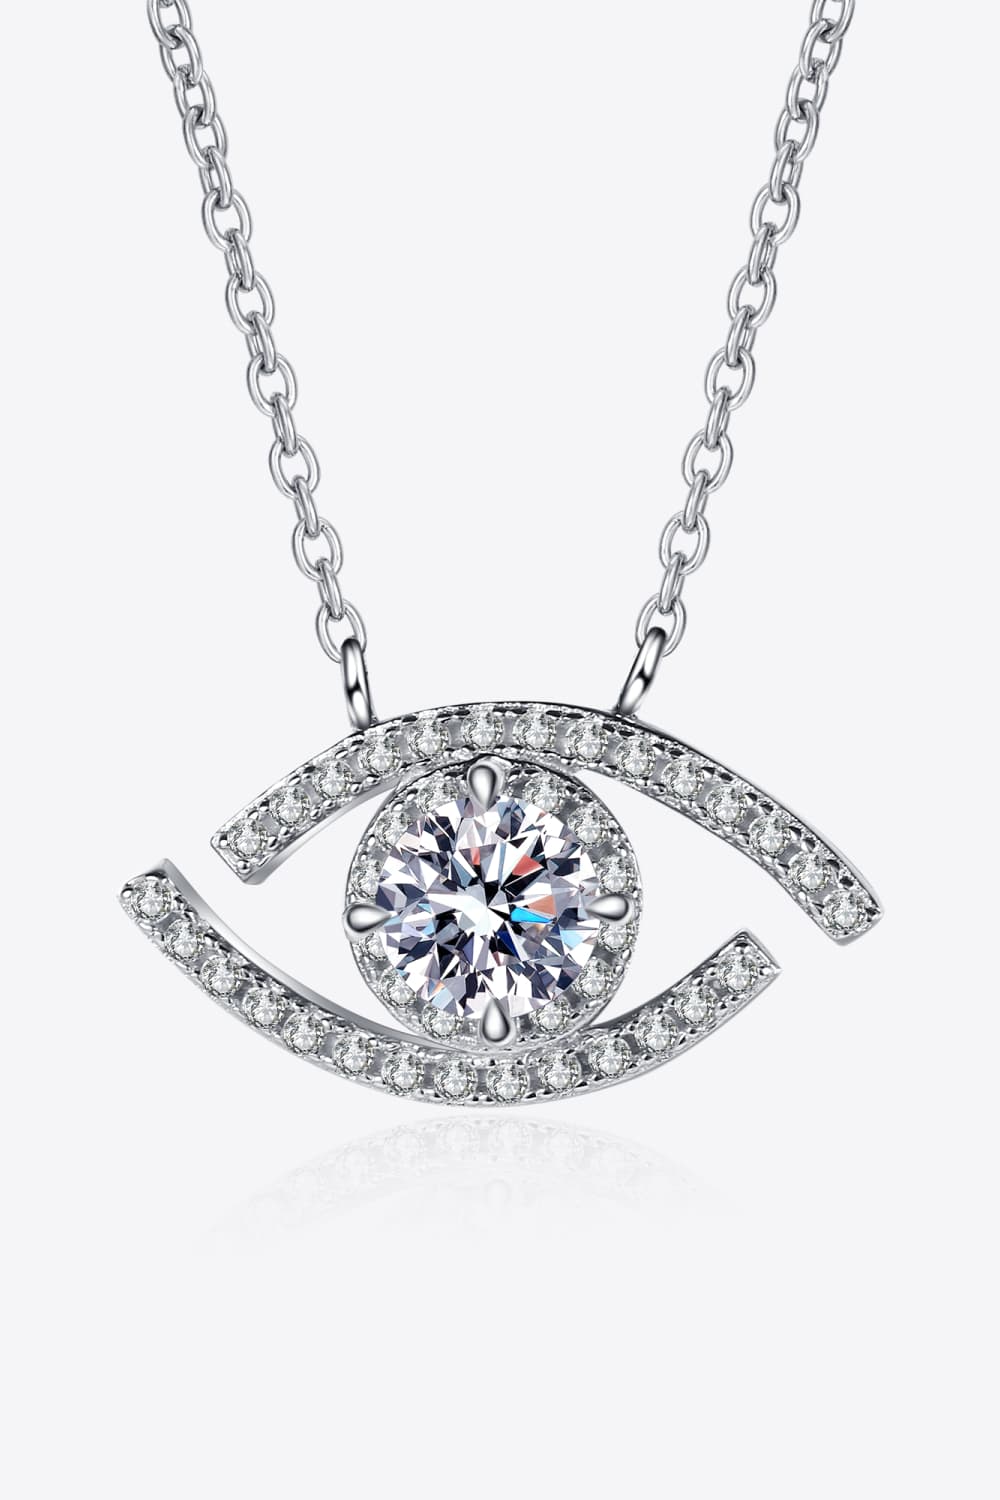 White Smoke Moissanite Evil Eye Pendant 925 Sterling Silver Necklace Sentient Beauty Fashions jewelry